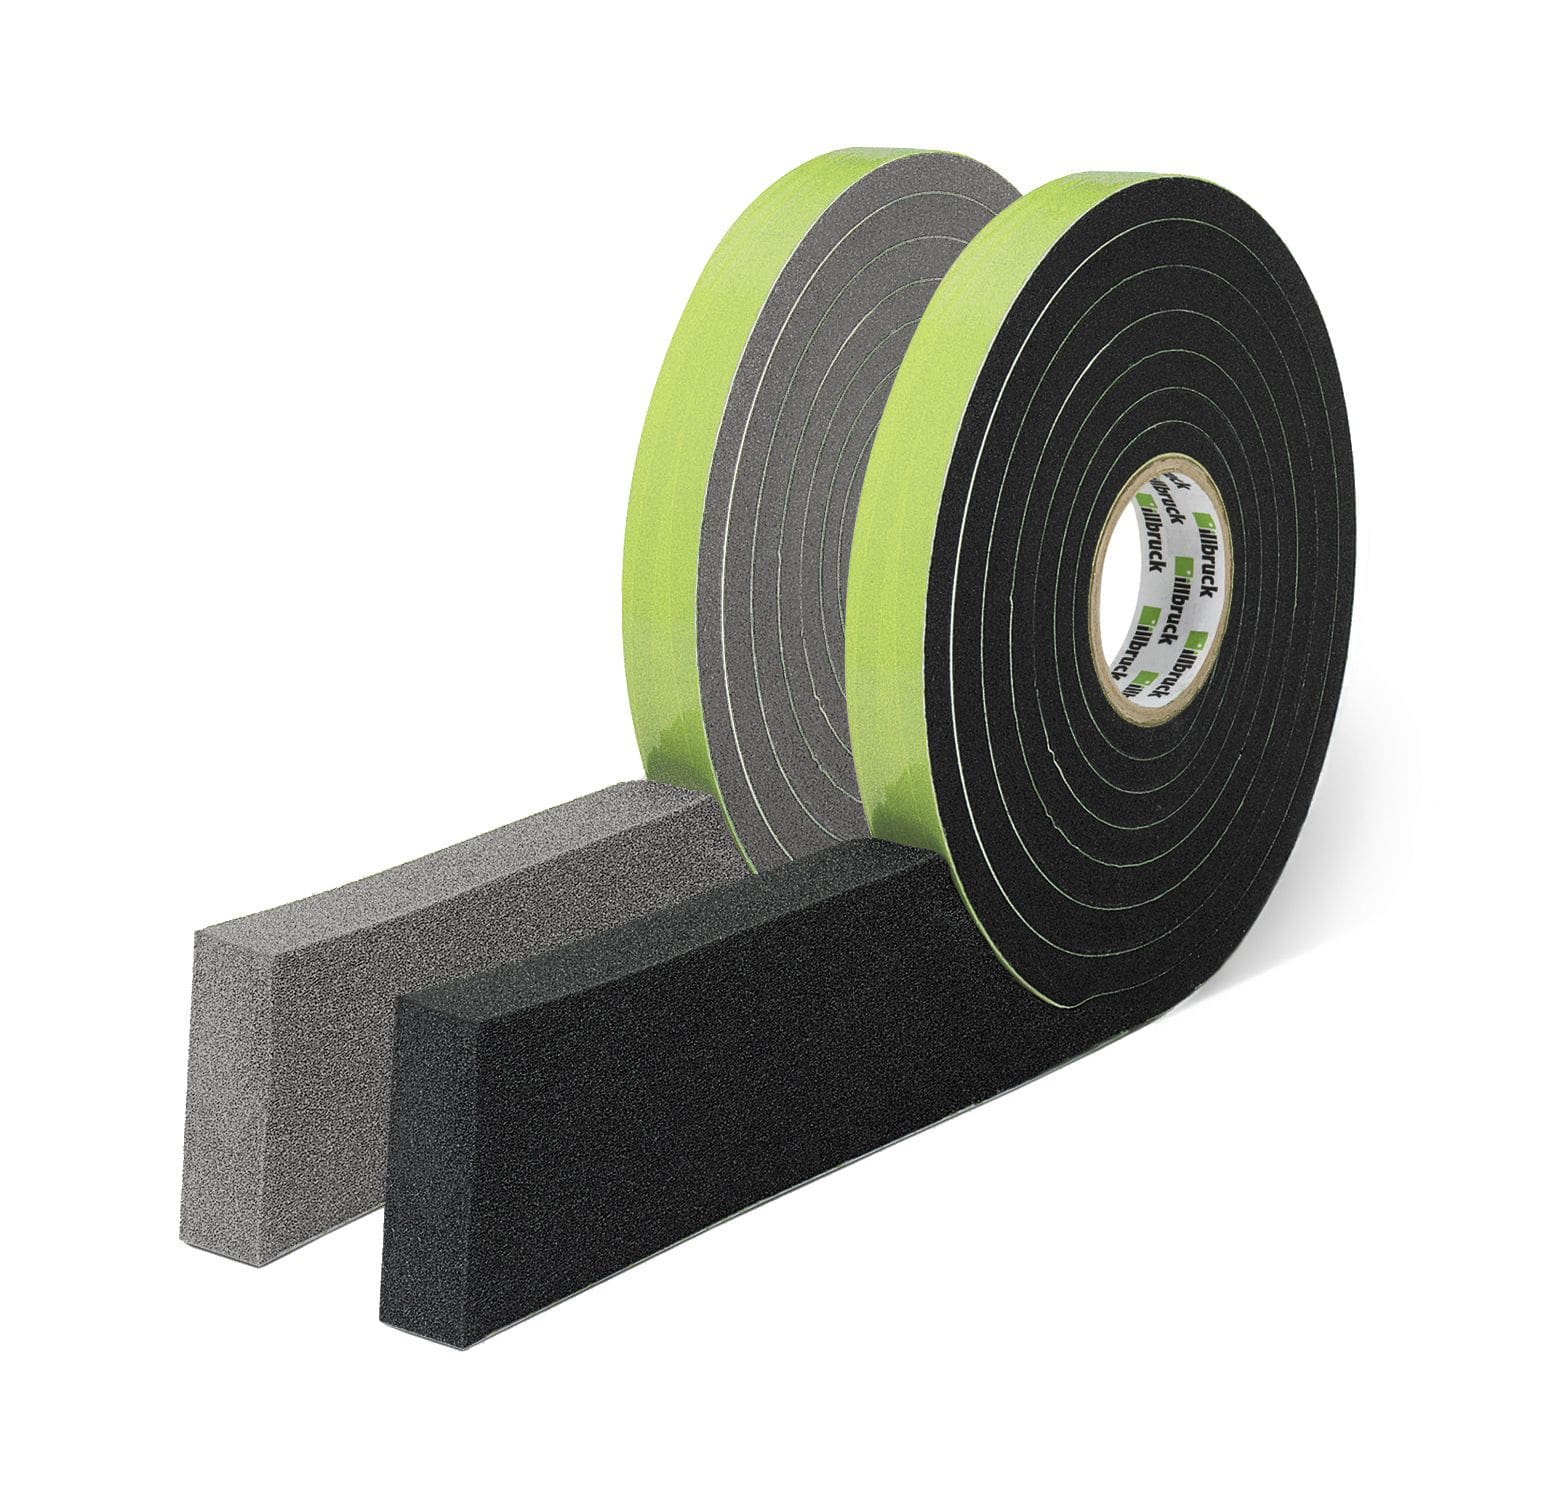 TP600 Compriband tape